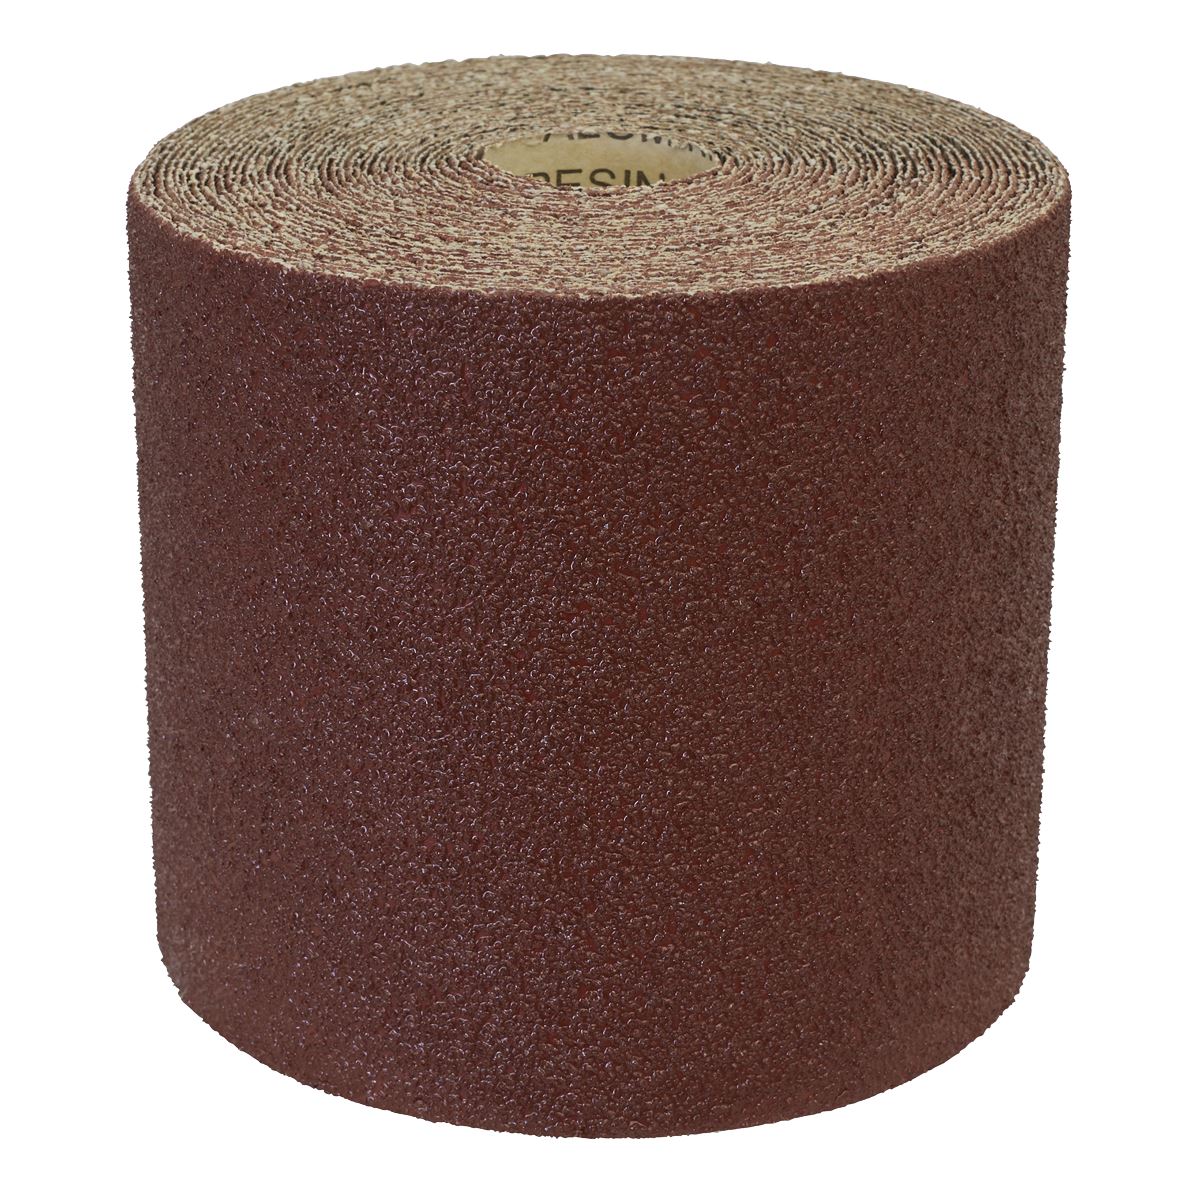 Worksafe by Sealey Production Sanding Roll 115mm x 10m - Extra Coarse 40Grit